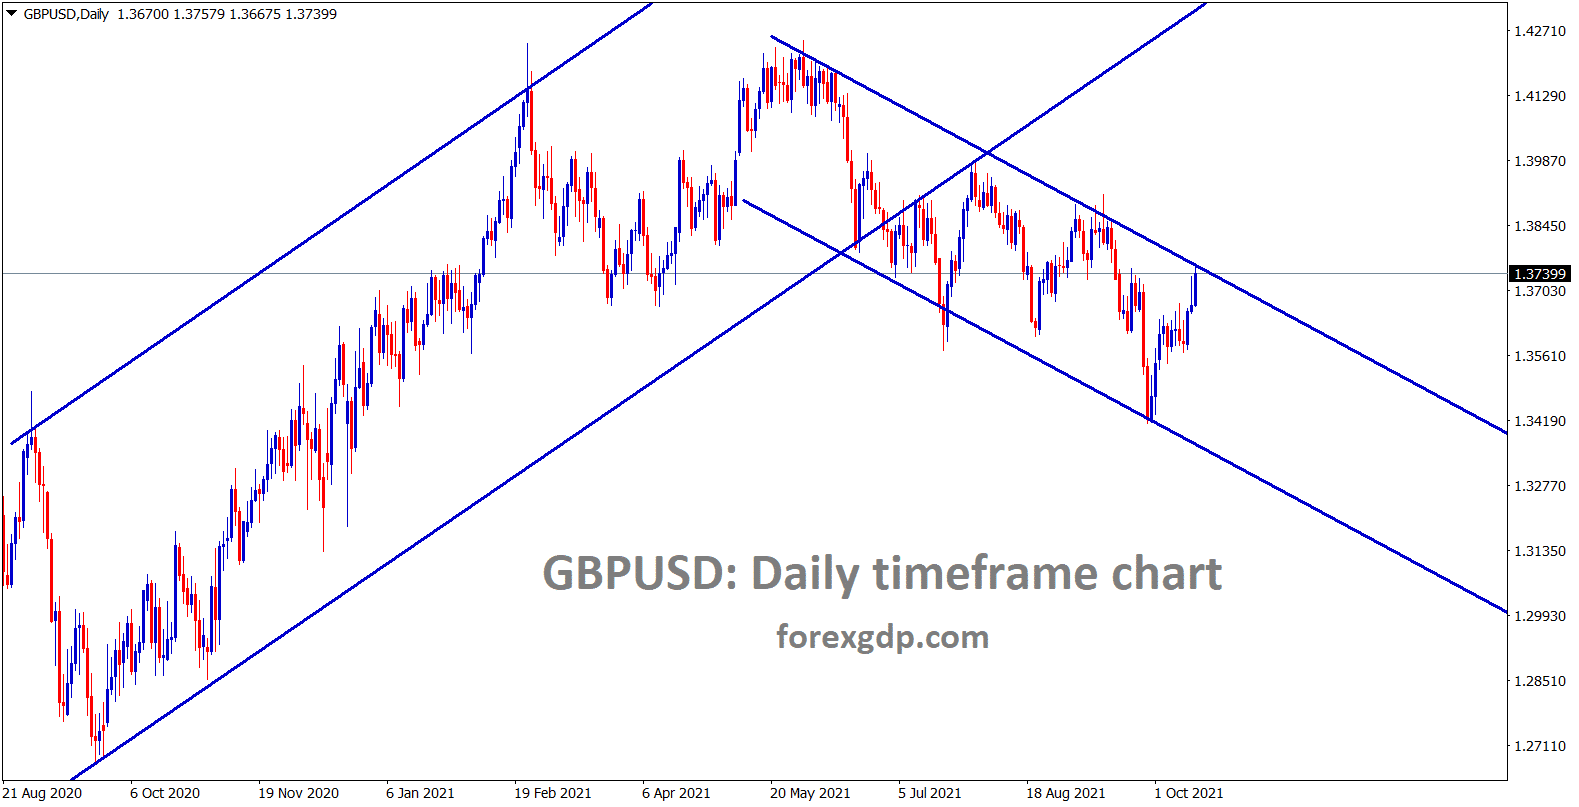 GBPUSD hits the lower high area of the descending channel range